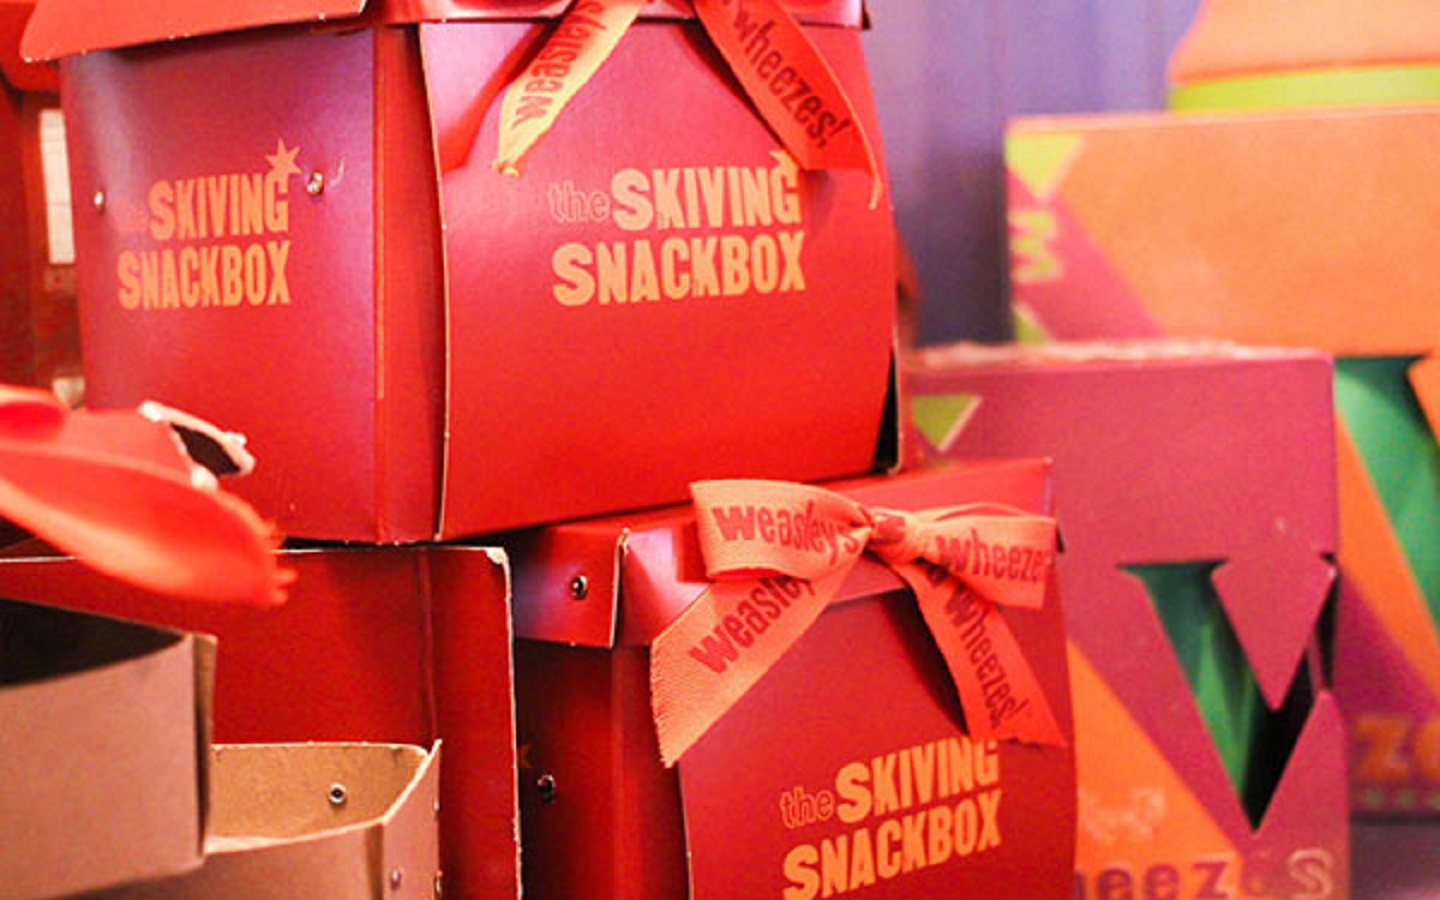 Skiving Snackboxes at The Wizarding World of Harry Potter - Diagon Alley